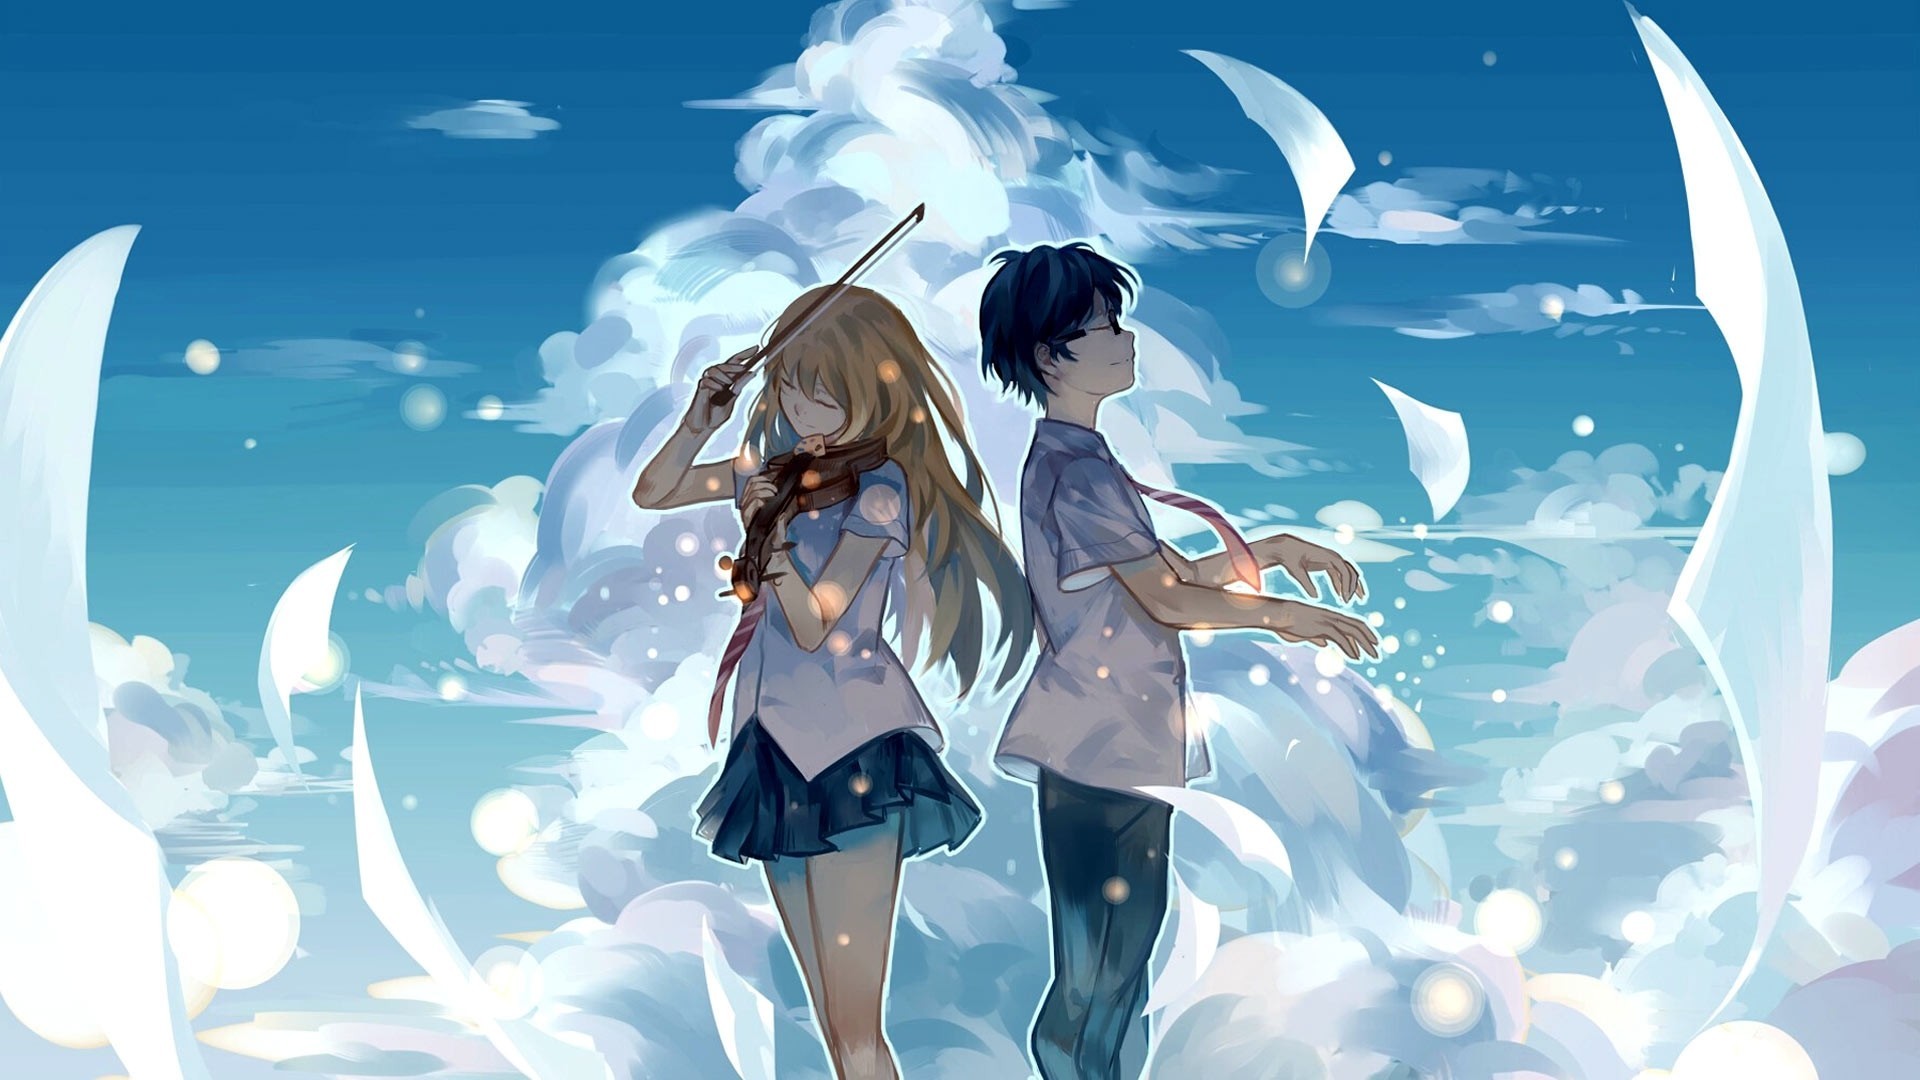 1920x1080  The 25+ best Hd anime wallpapers ideas on Pinterest | Anime  wallpaper download,